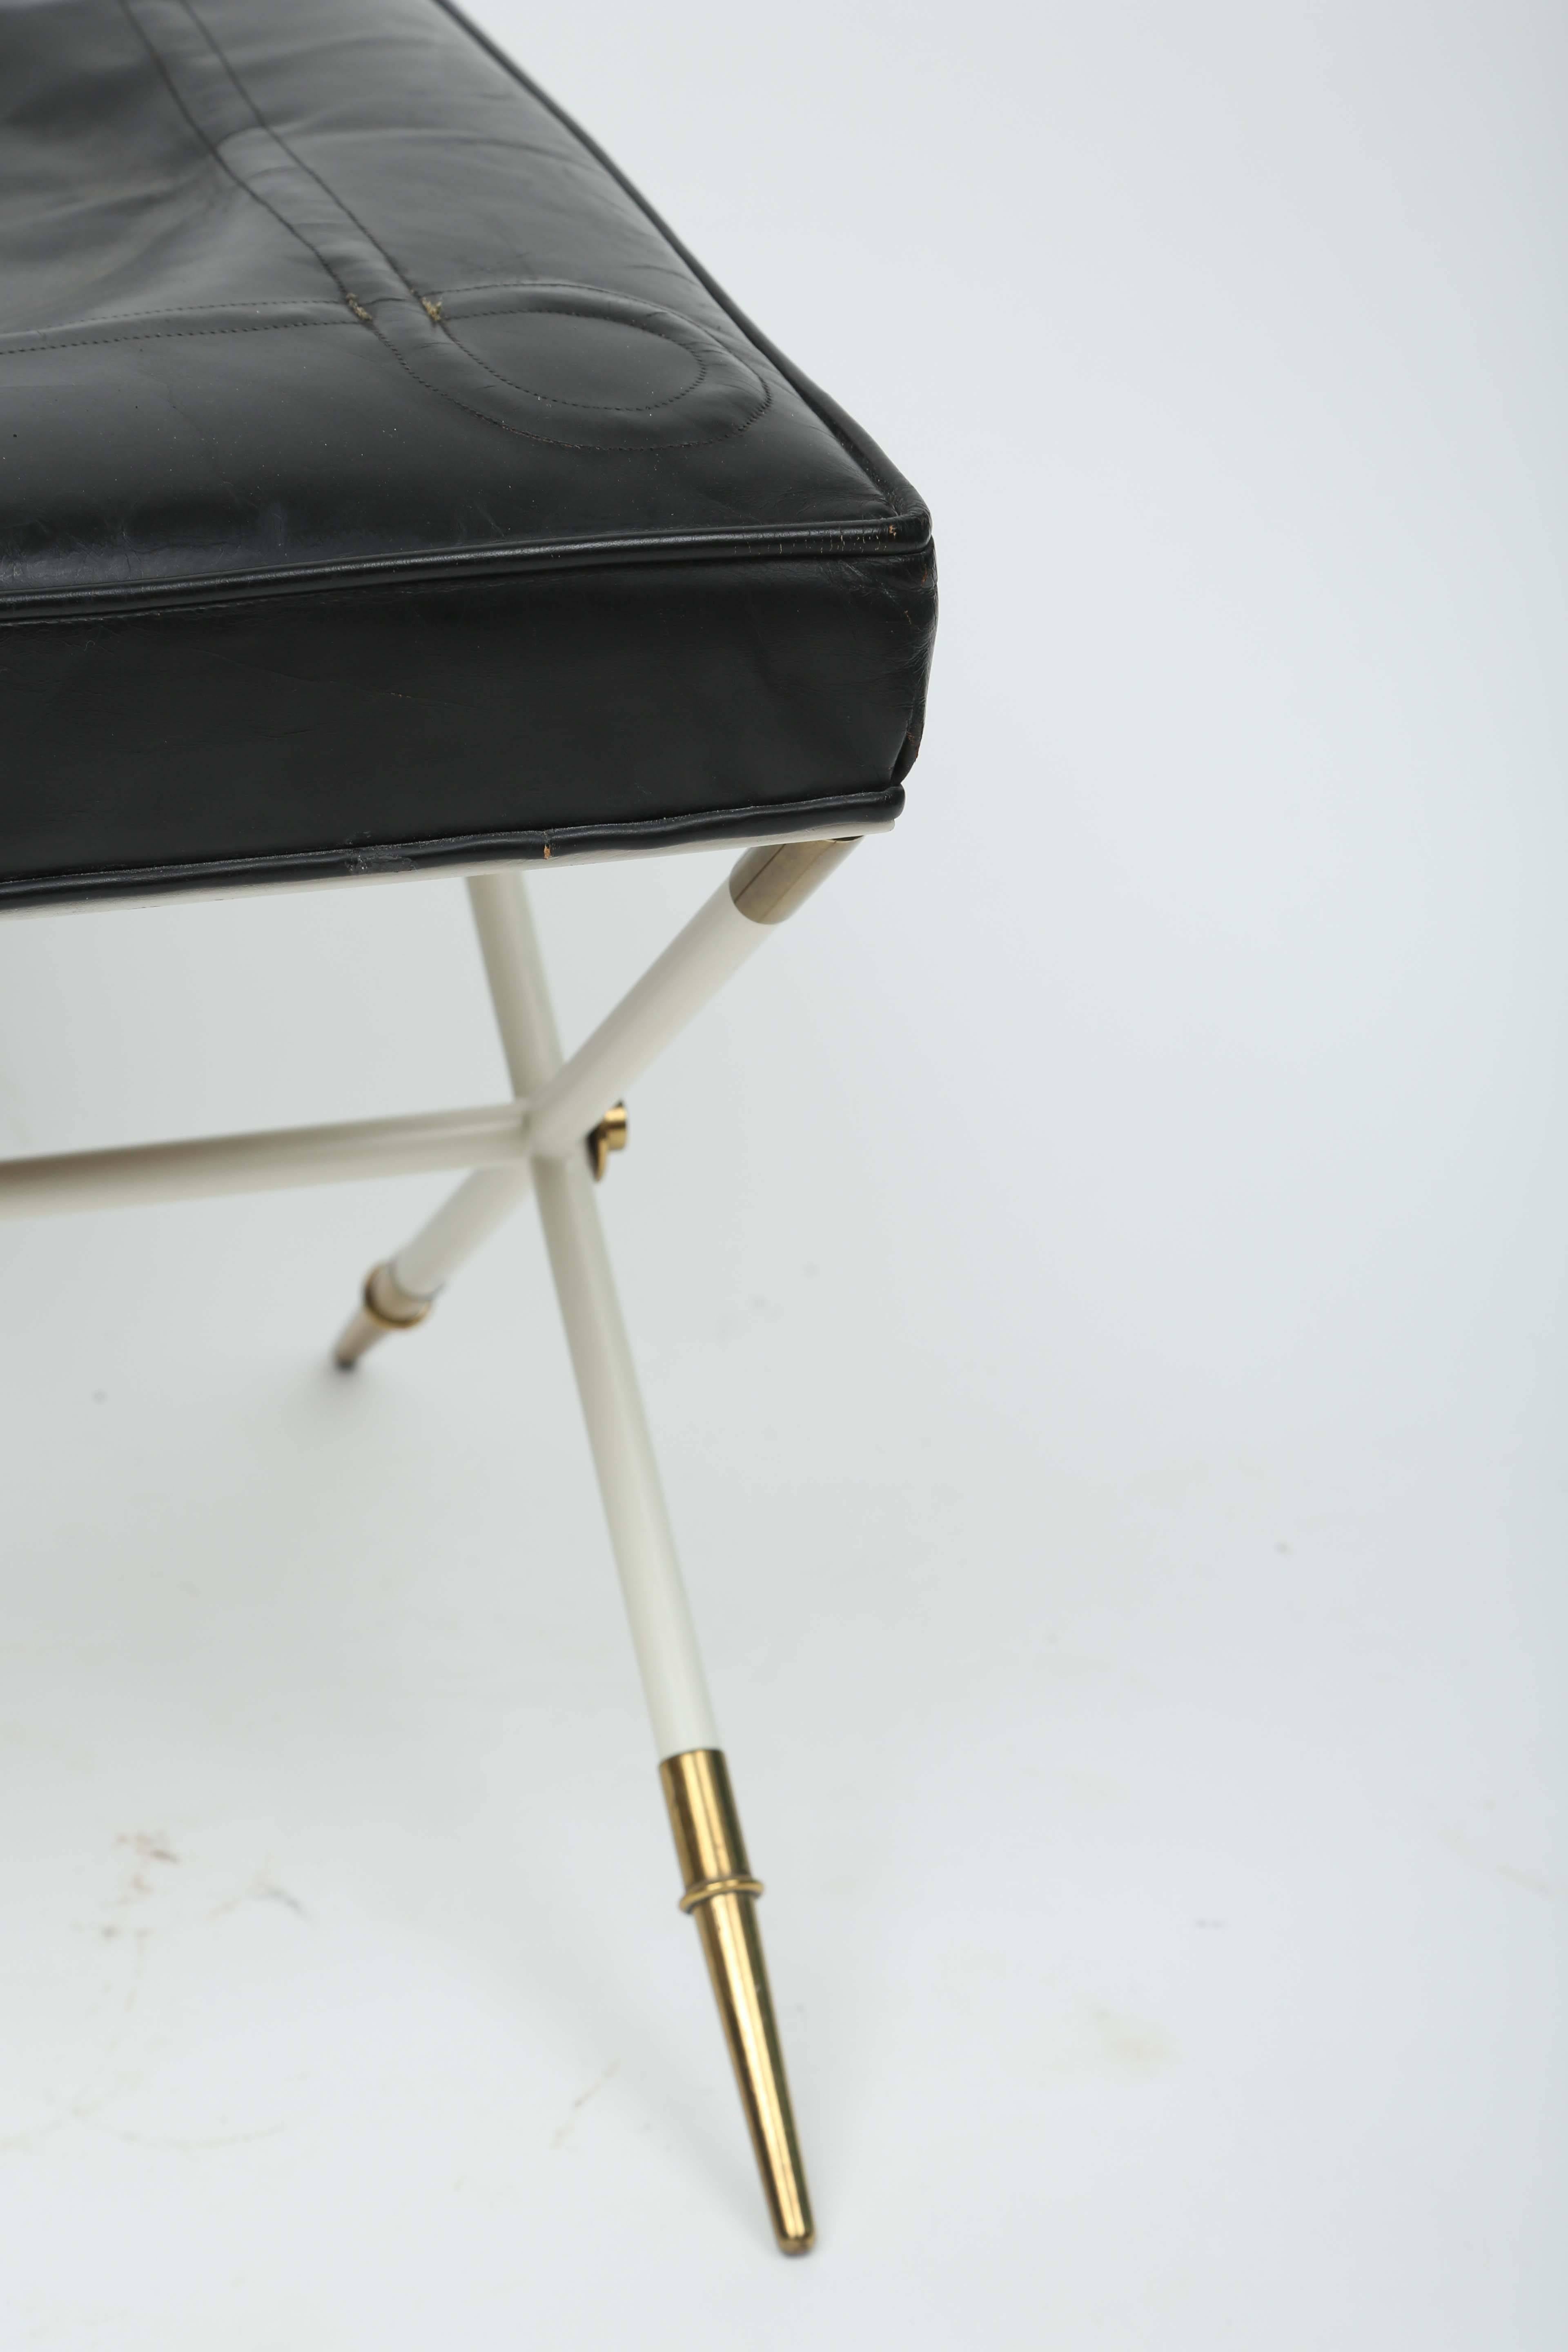 Tommi Parzinger Brass and Embossed Leather Stools For Sale 3